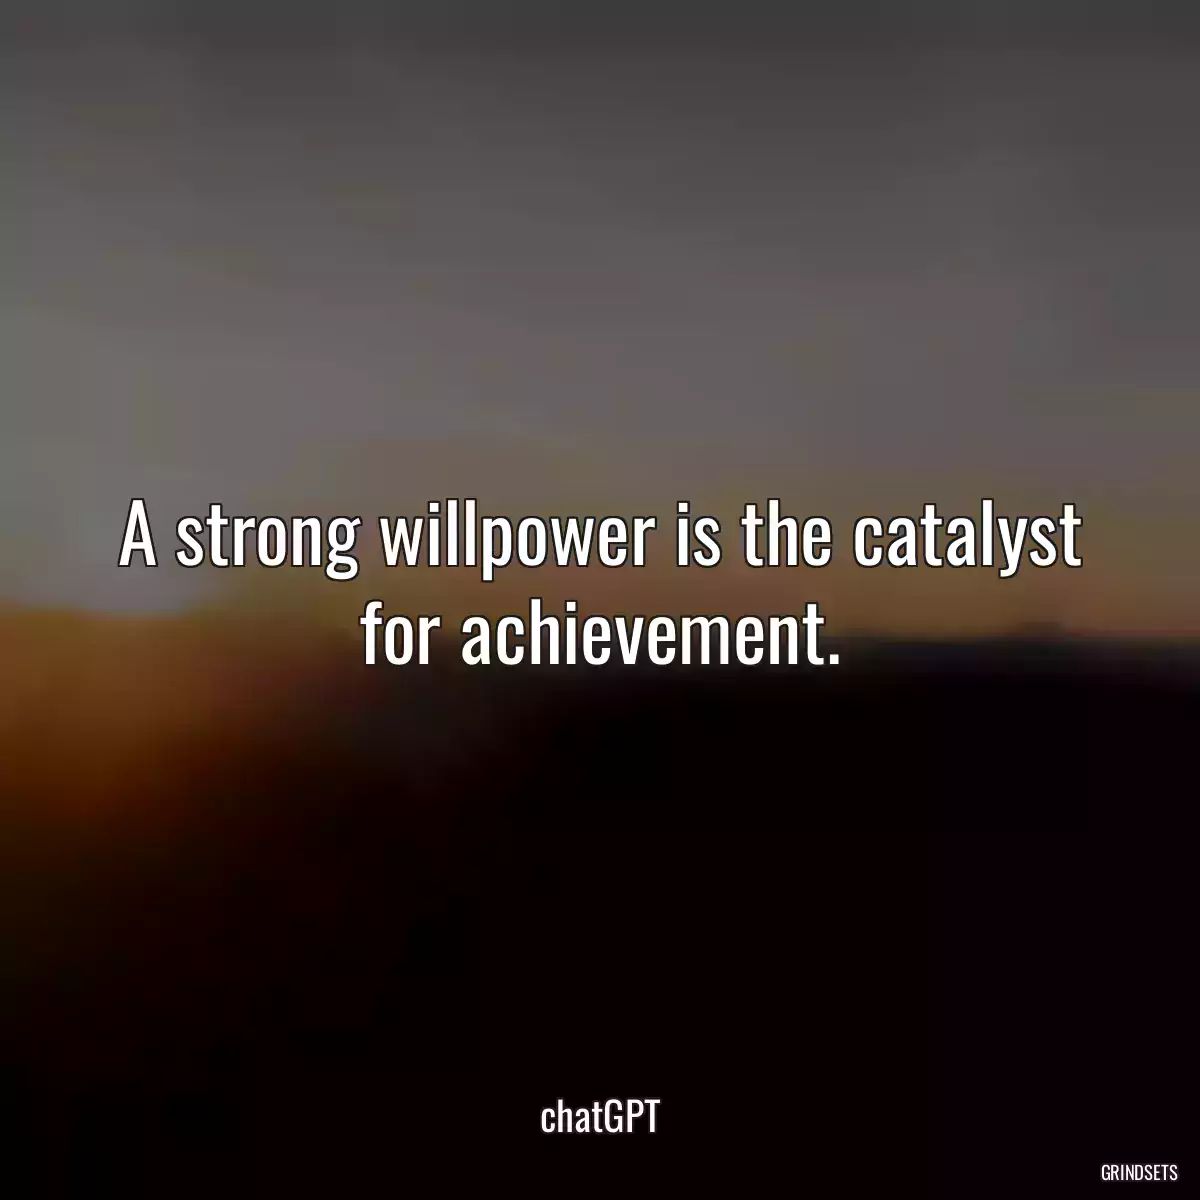 A strong willpower is the catalyst for achievement.